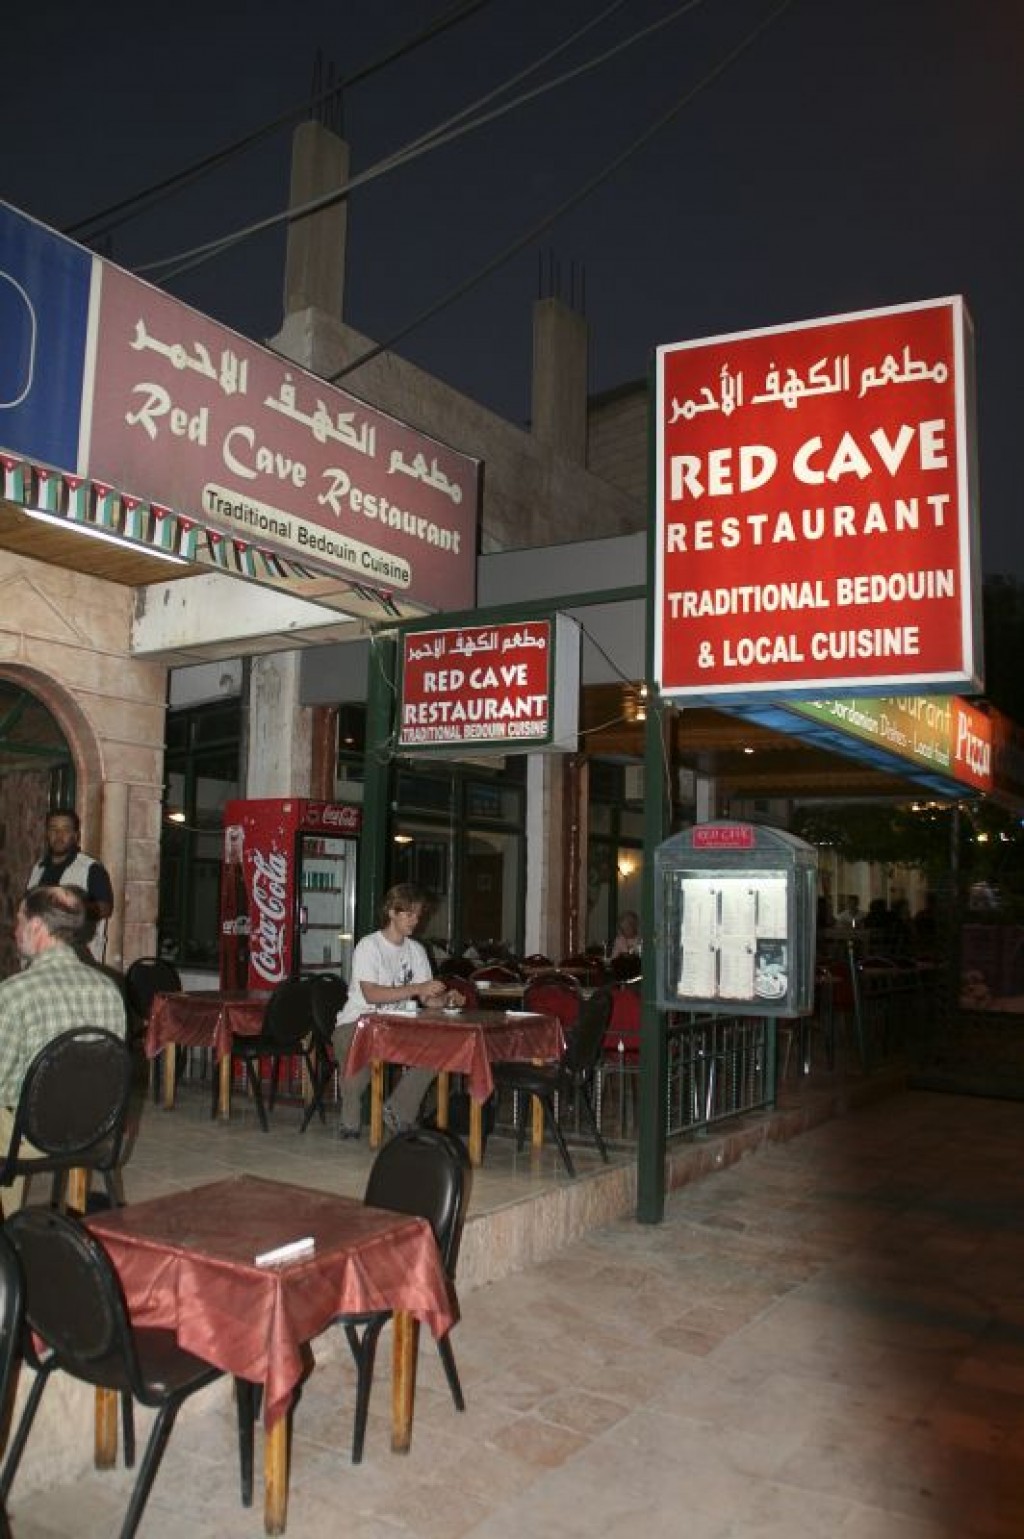 We also ate at the Red Cave Restaurant in Wadi Musa